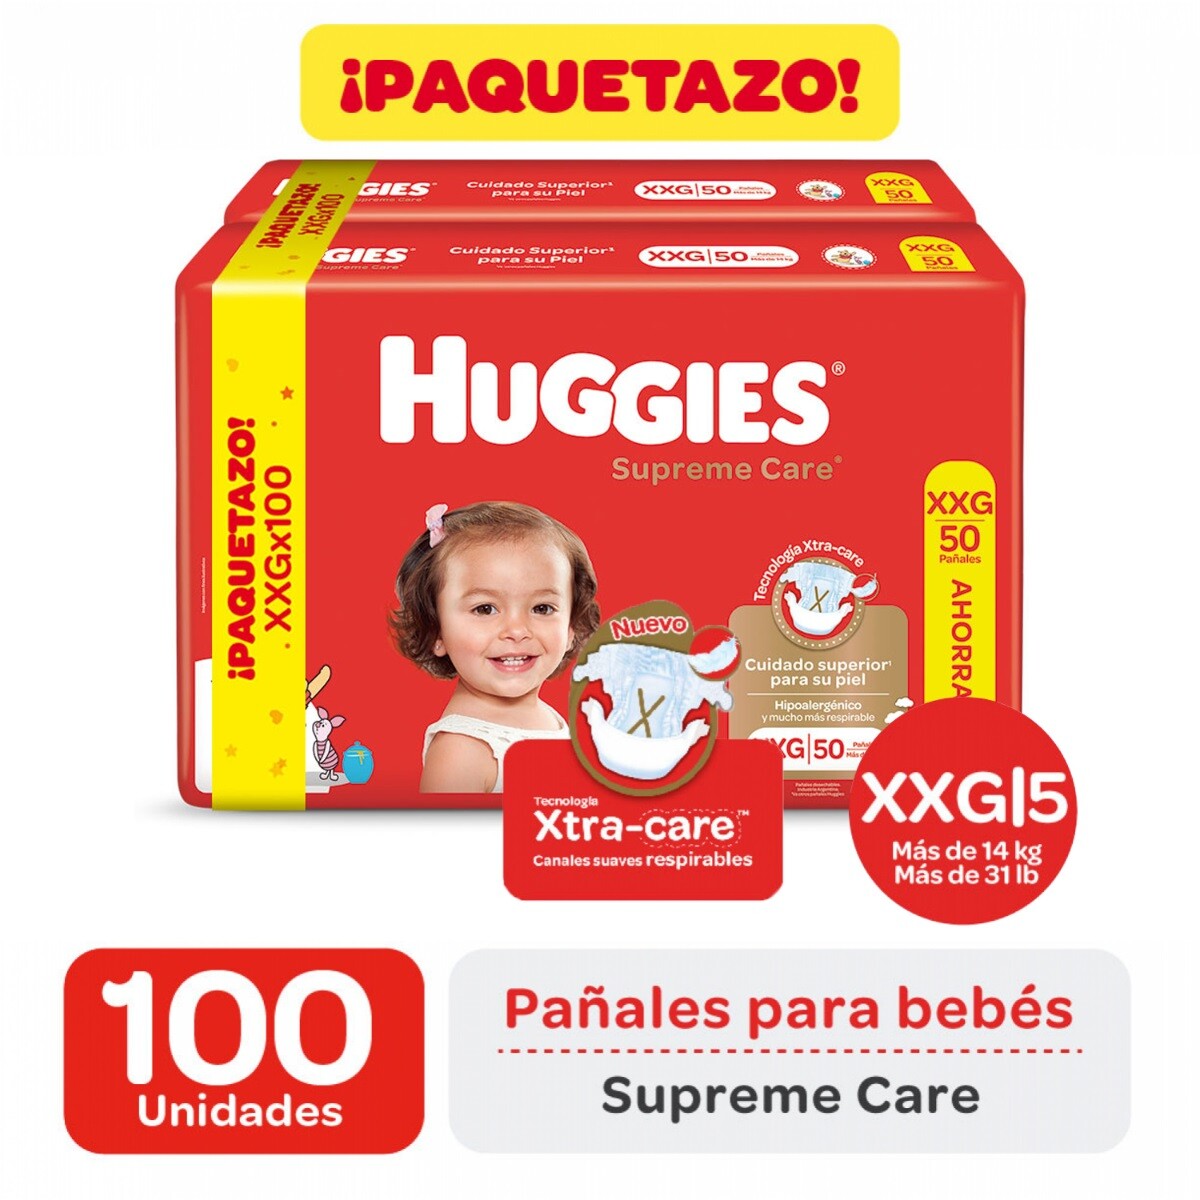 Pañales Huggies Supreme Care Talle Xxg 100 Uds. 